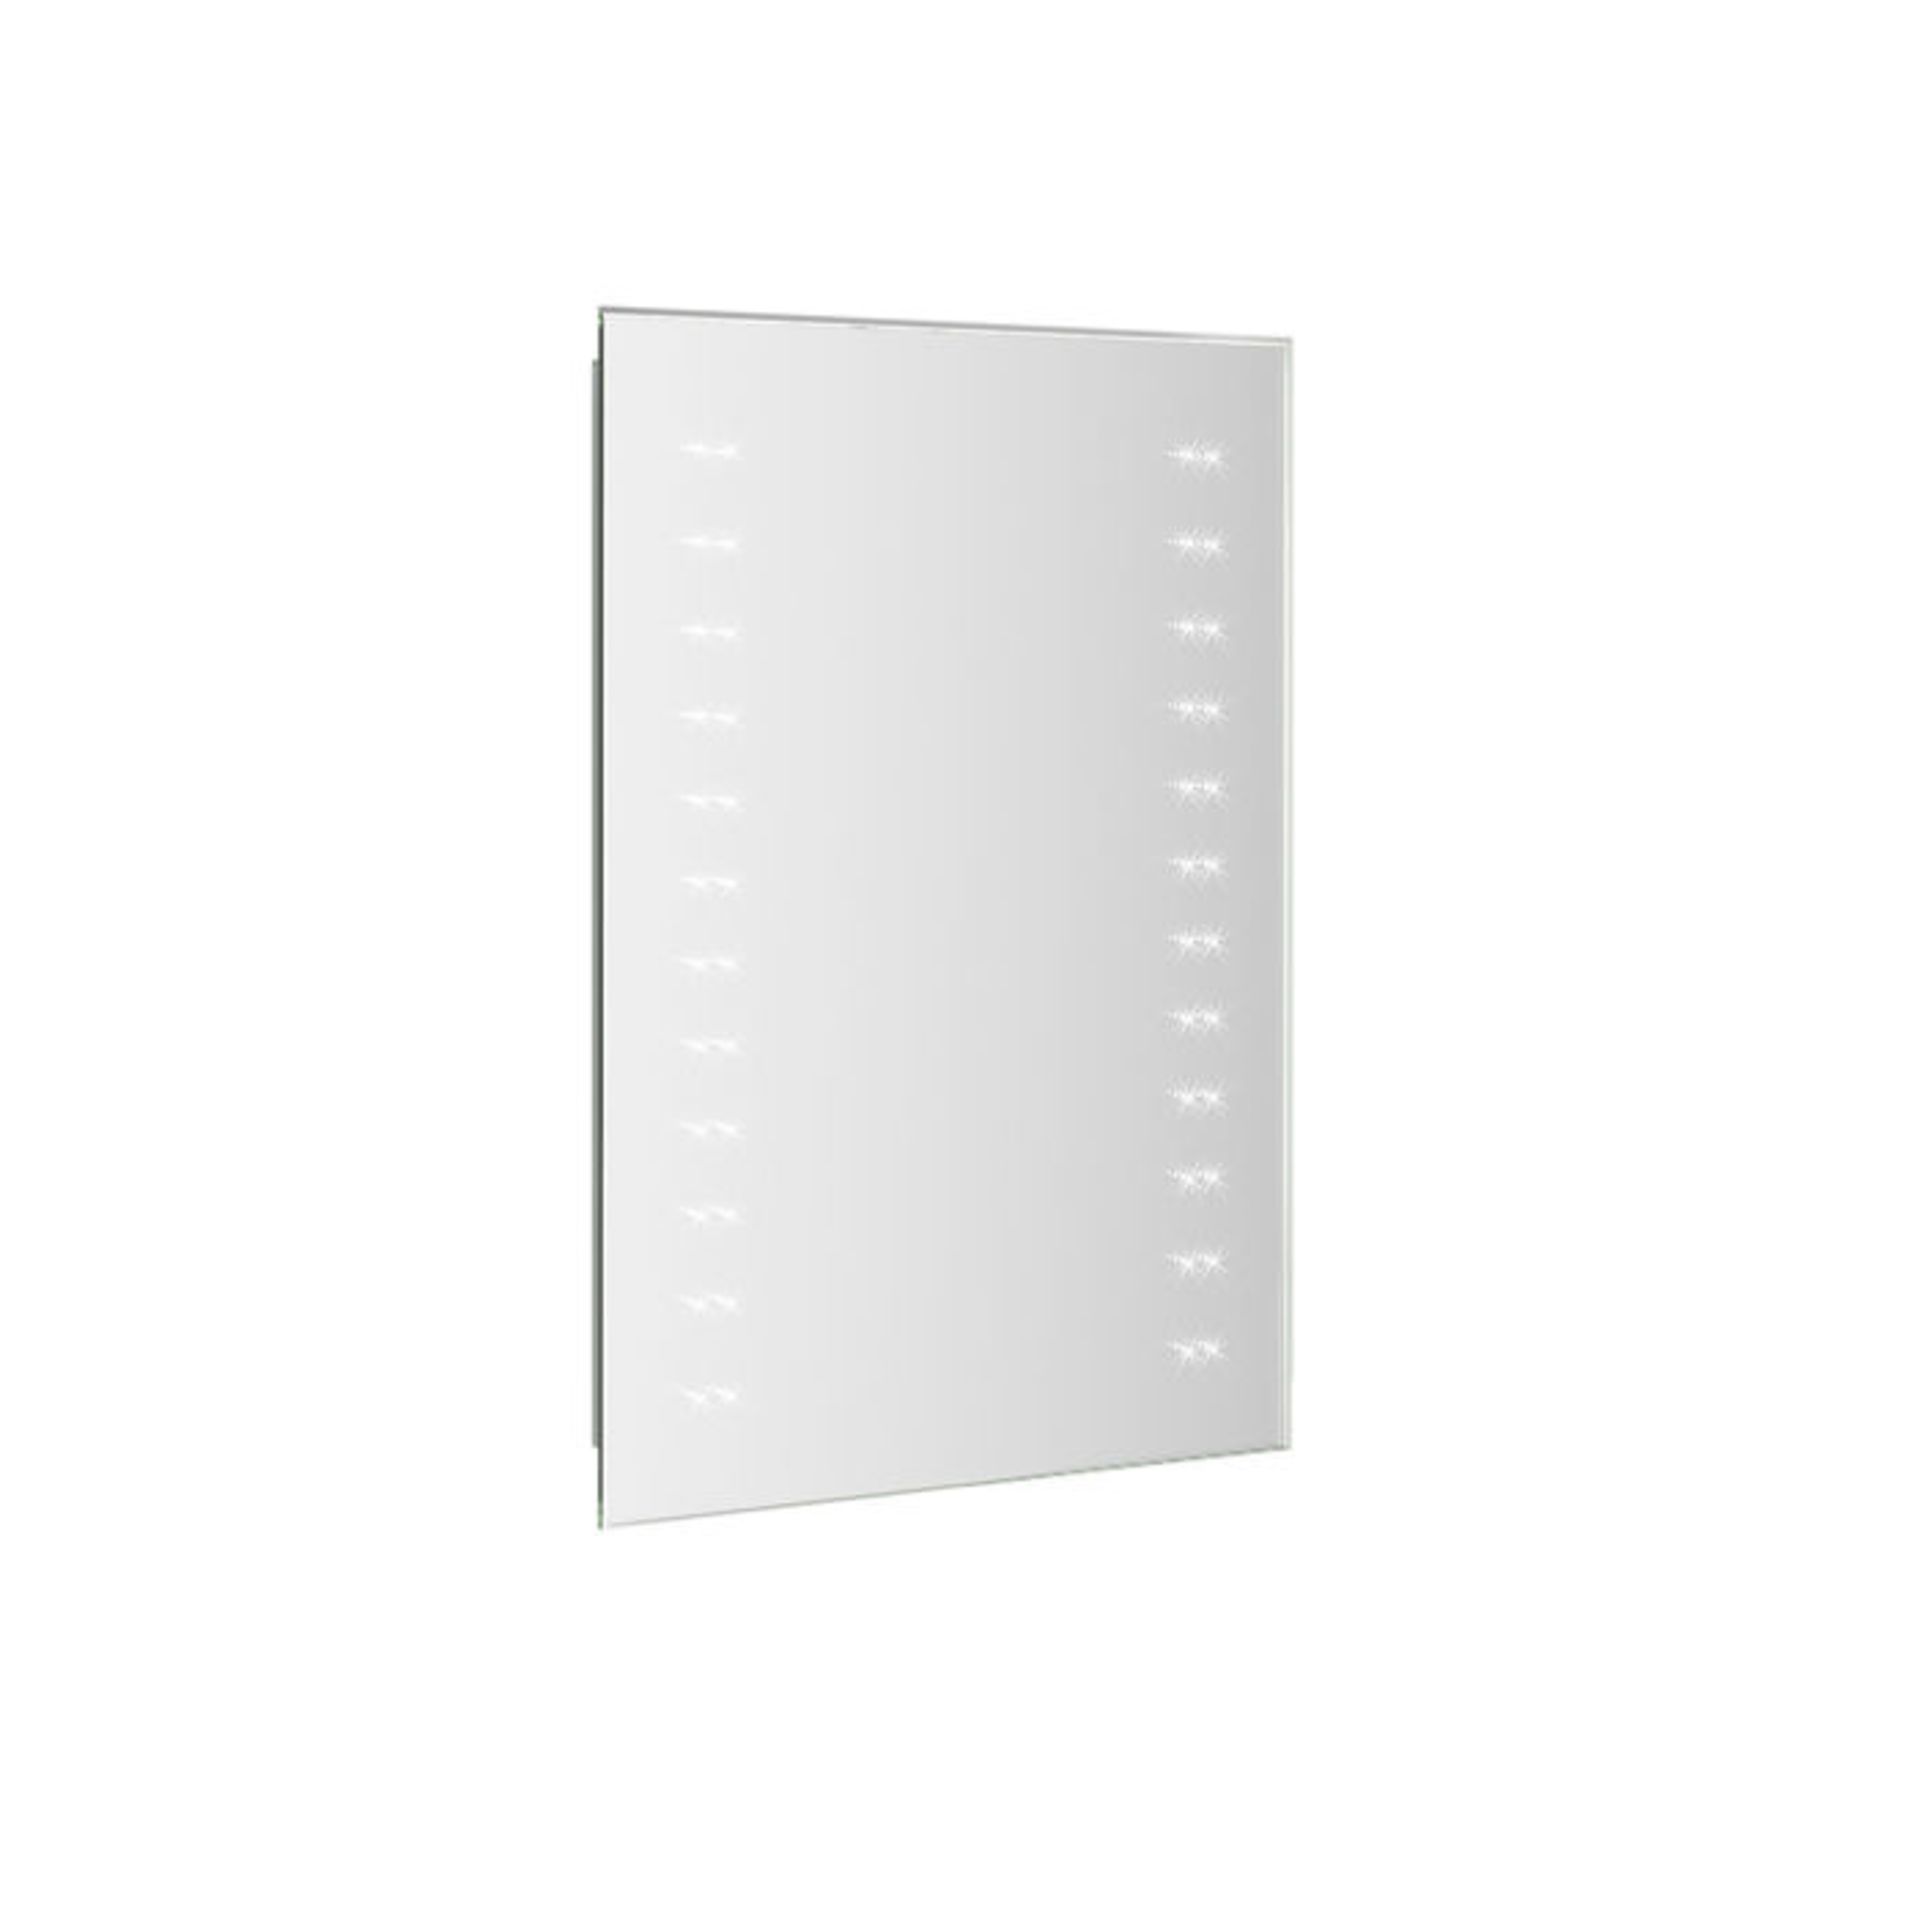 (JF128) 390x500mm Battery Operated LED Mirror. Energy saving controlled On / Off switch Conve...